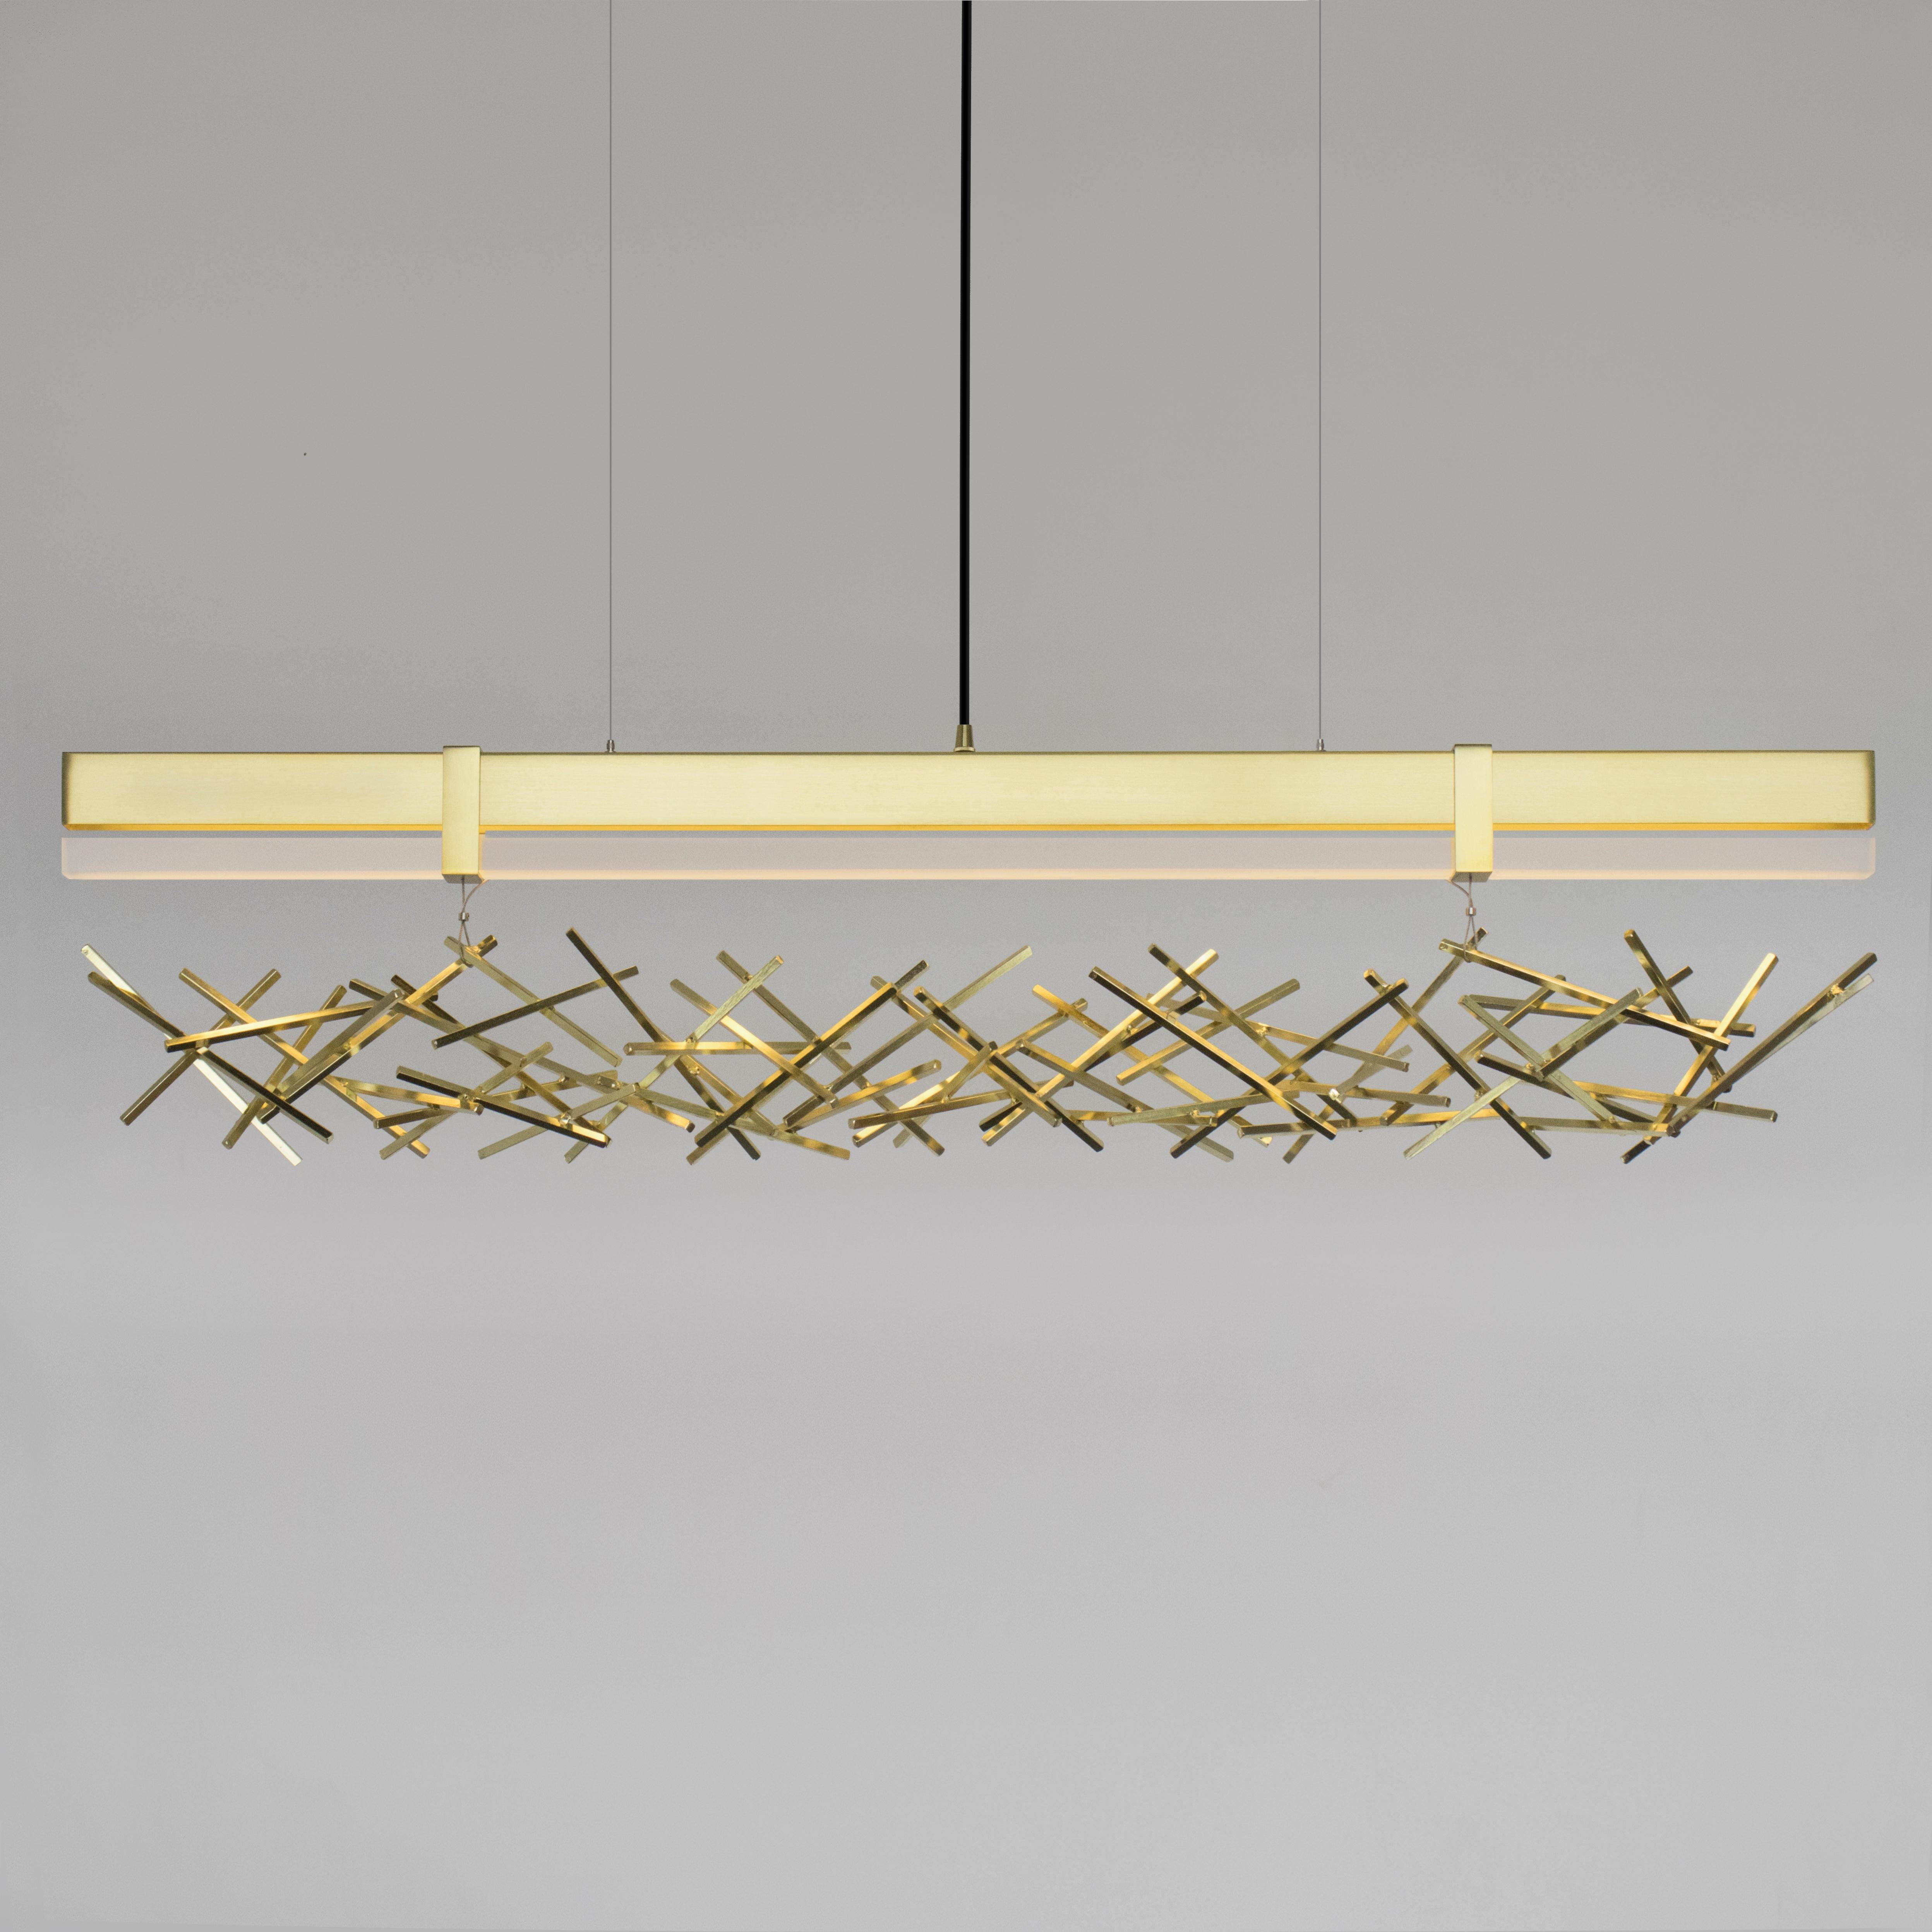 The LEVEL/ CRISS-CROSS Pendant is built of cold-rolled steel with an LED light source that is diffused by a satin hand-rubbed acrylic diffuser. The CRISS-CROSS element is suspended below as a decorative sculpture. This pendant works as an individual